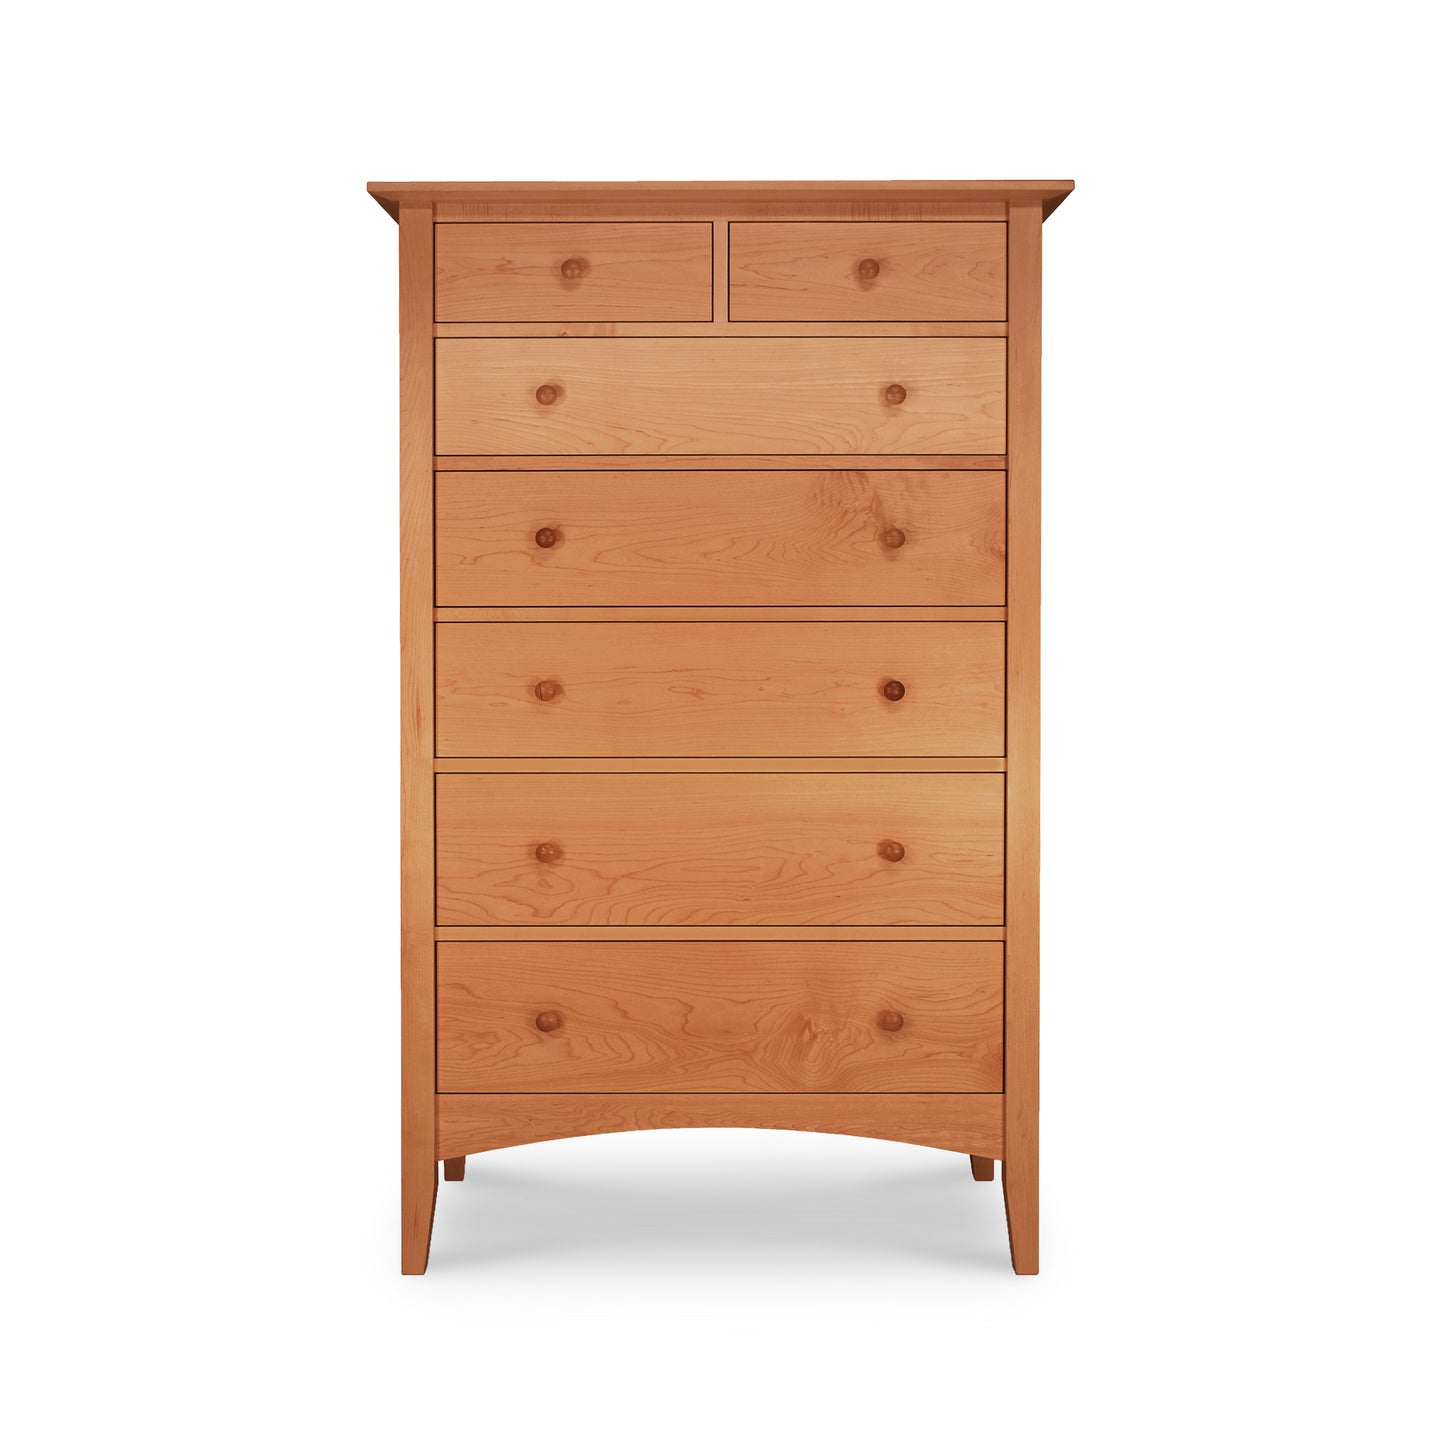 An American Shaker 7-Drawer Chest made by Maple Corner Woodworks, from sustainably harvested hardwoods on a white background.